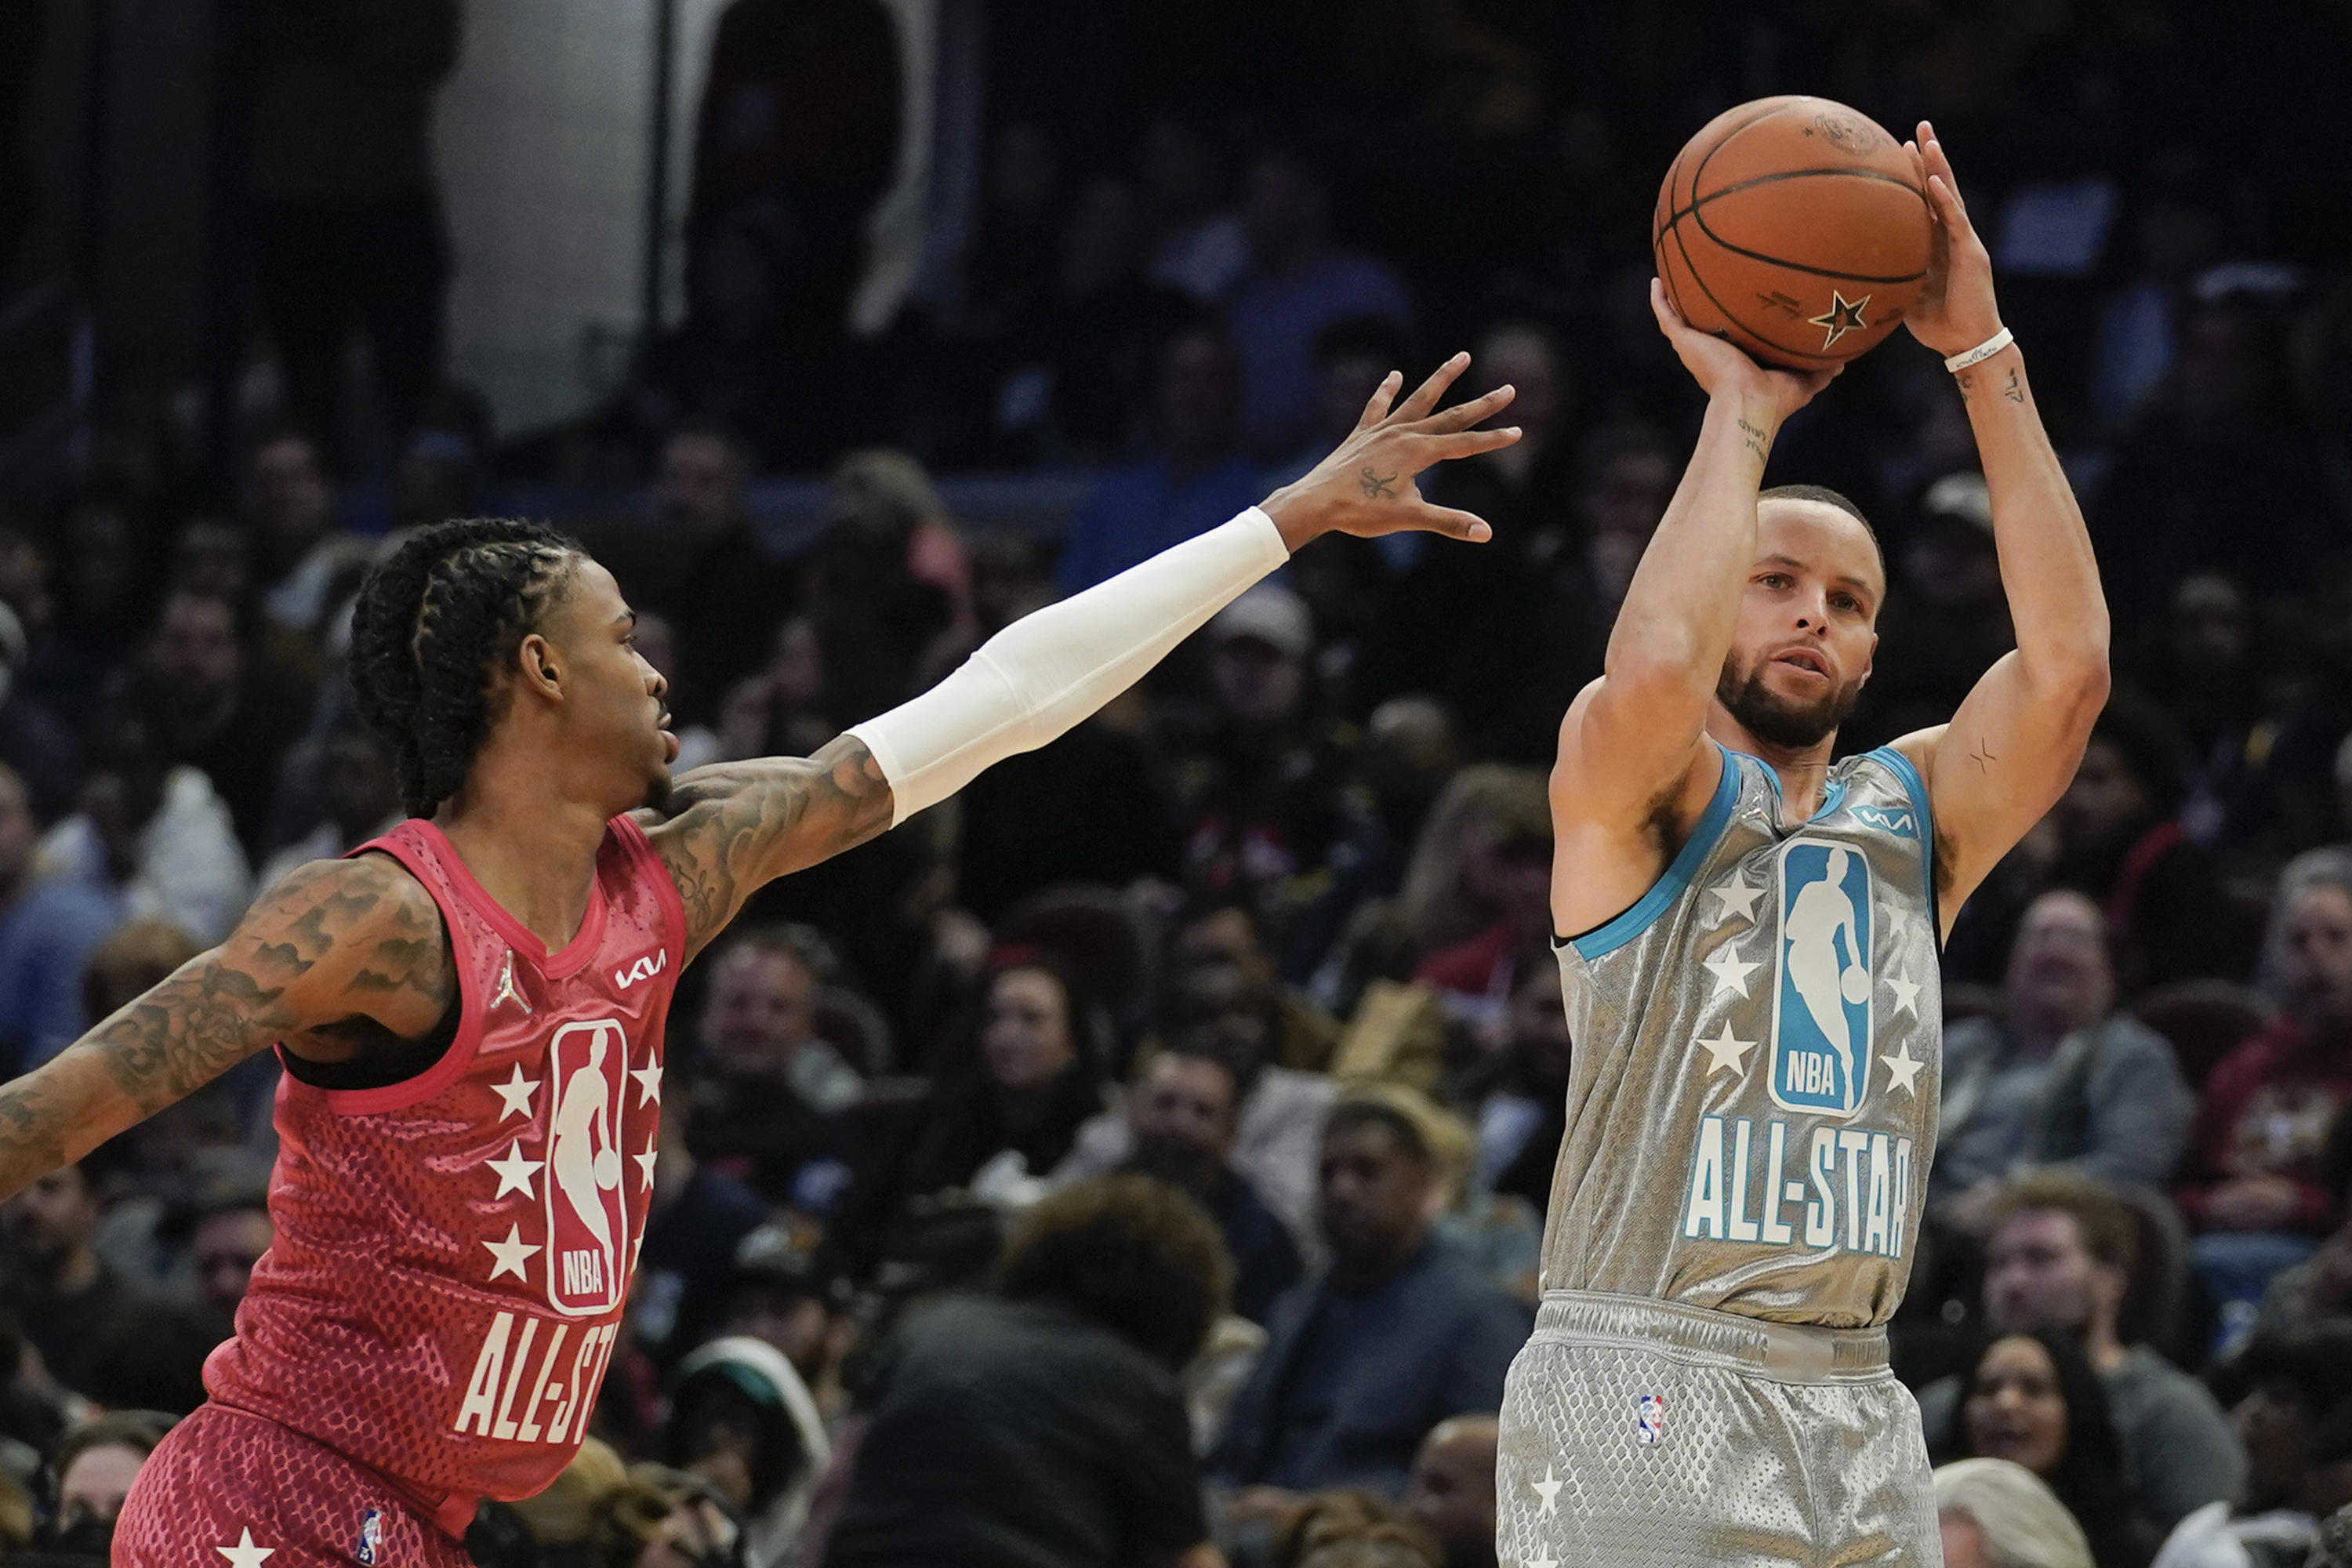 NBA All-Star Game 2022: LeBron James, Stephen Curry Lead 3rd